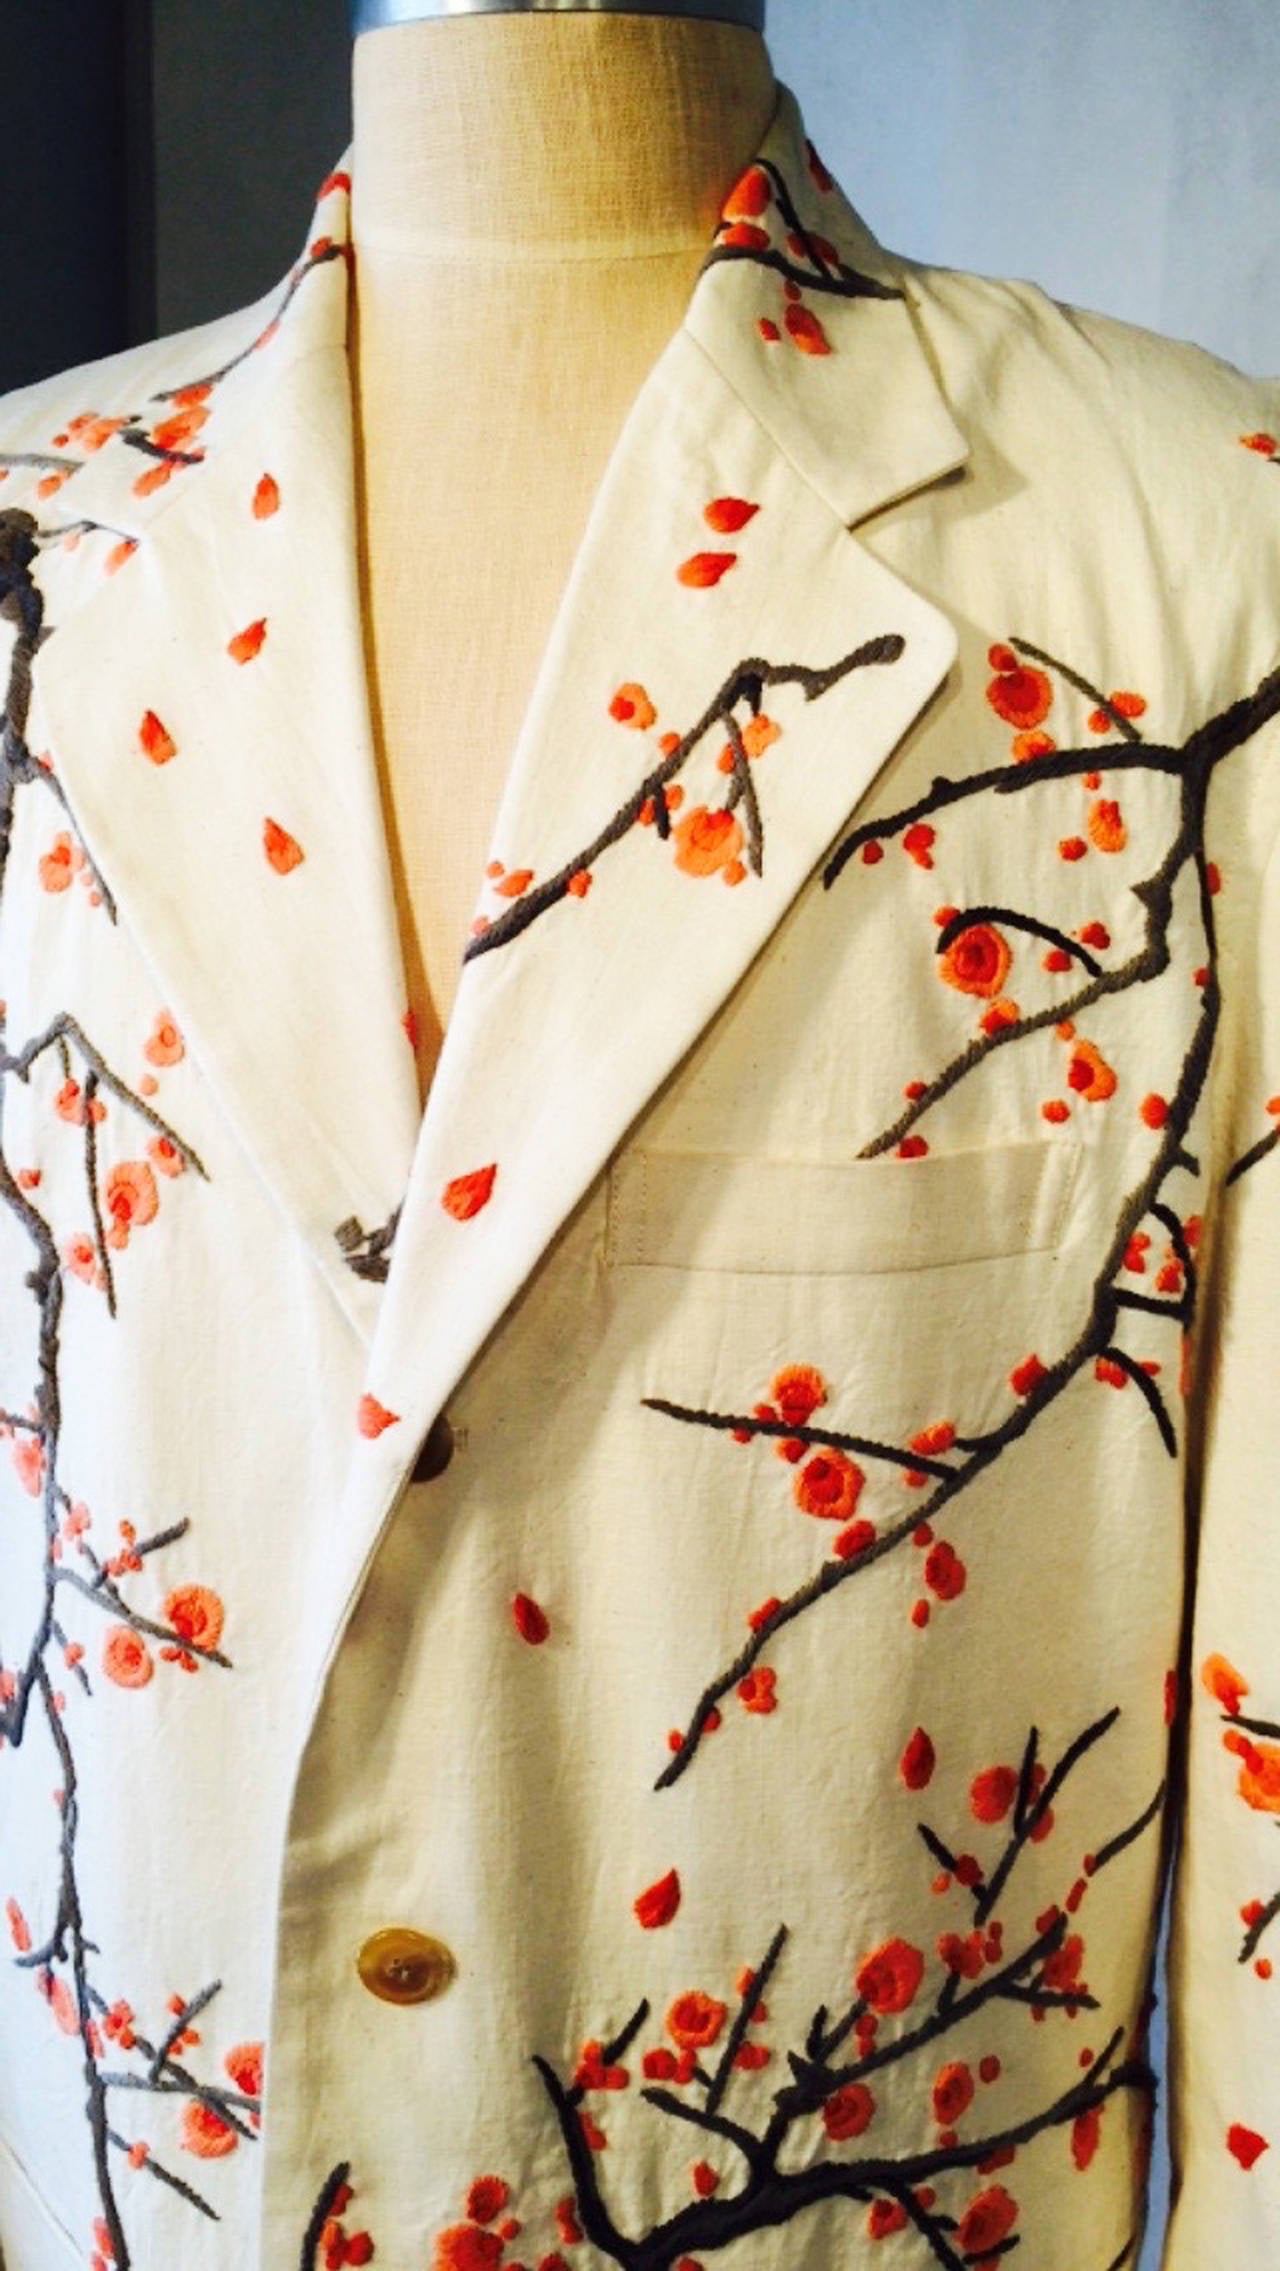 A fine vintage Issey Miyake gents embroidered jacket. Authentic ivory cotton item features beautifully embroidered front, back and sleeves in cherry blossom branches. Item fully lined with a three button front and no back vent. Item unworn with